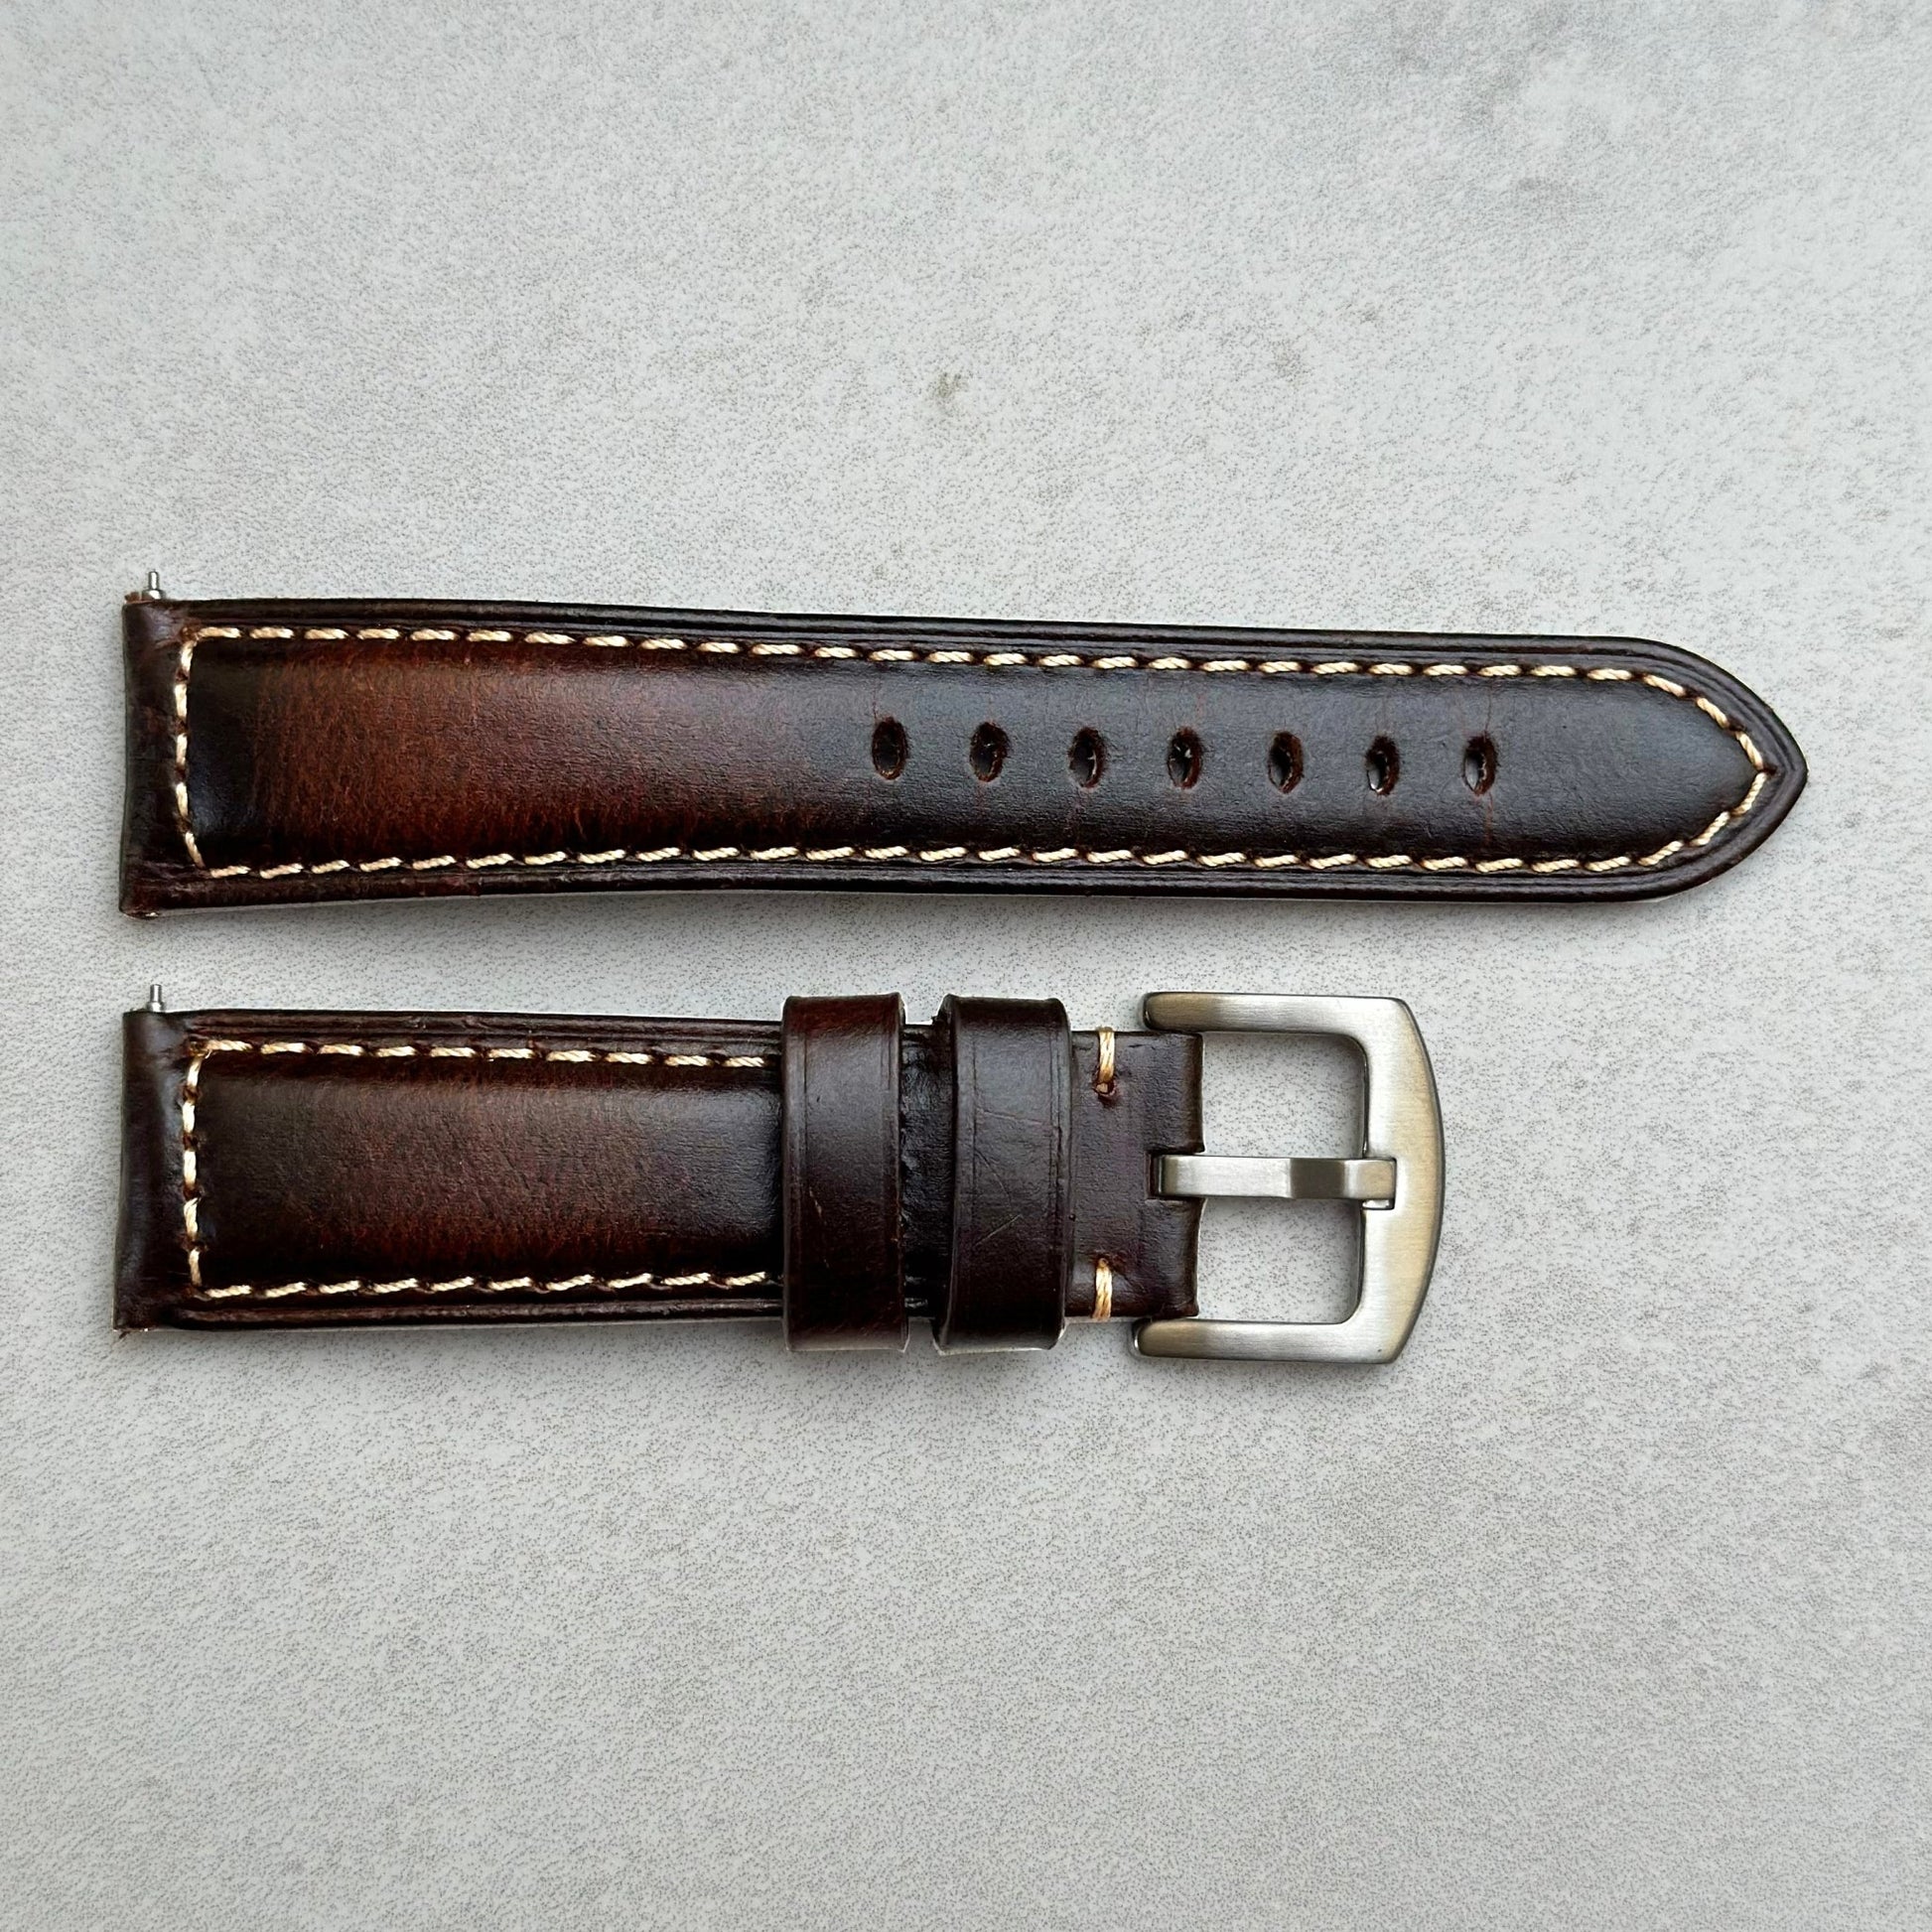 Berlin brown full grain leather watch strap. Contrast ivory stitching. 18mm, 20mm, 22mm and 24mm. Watch And Strap.